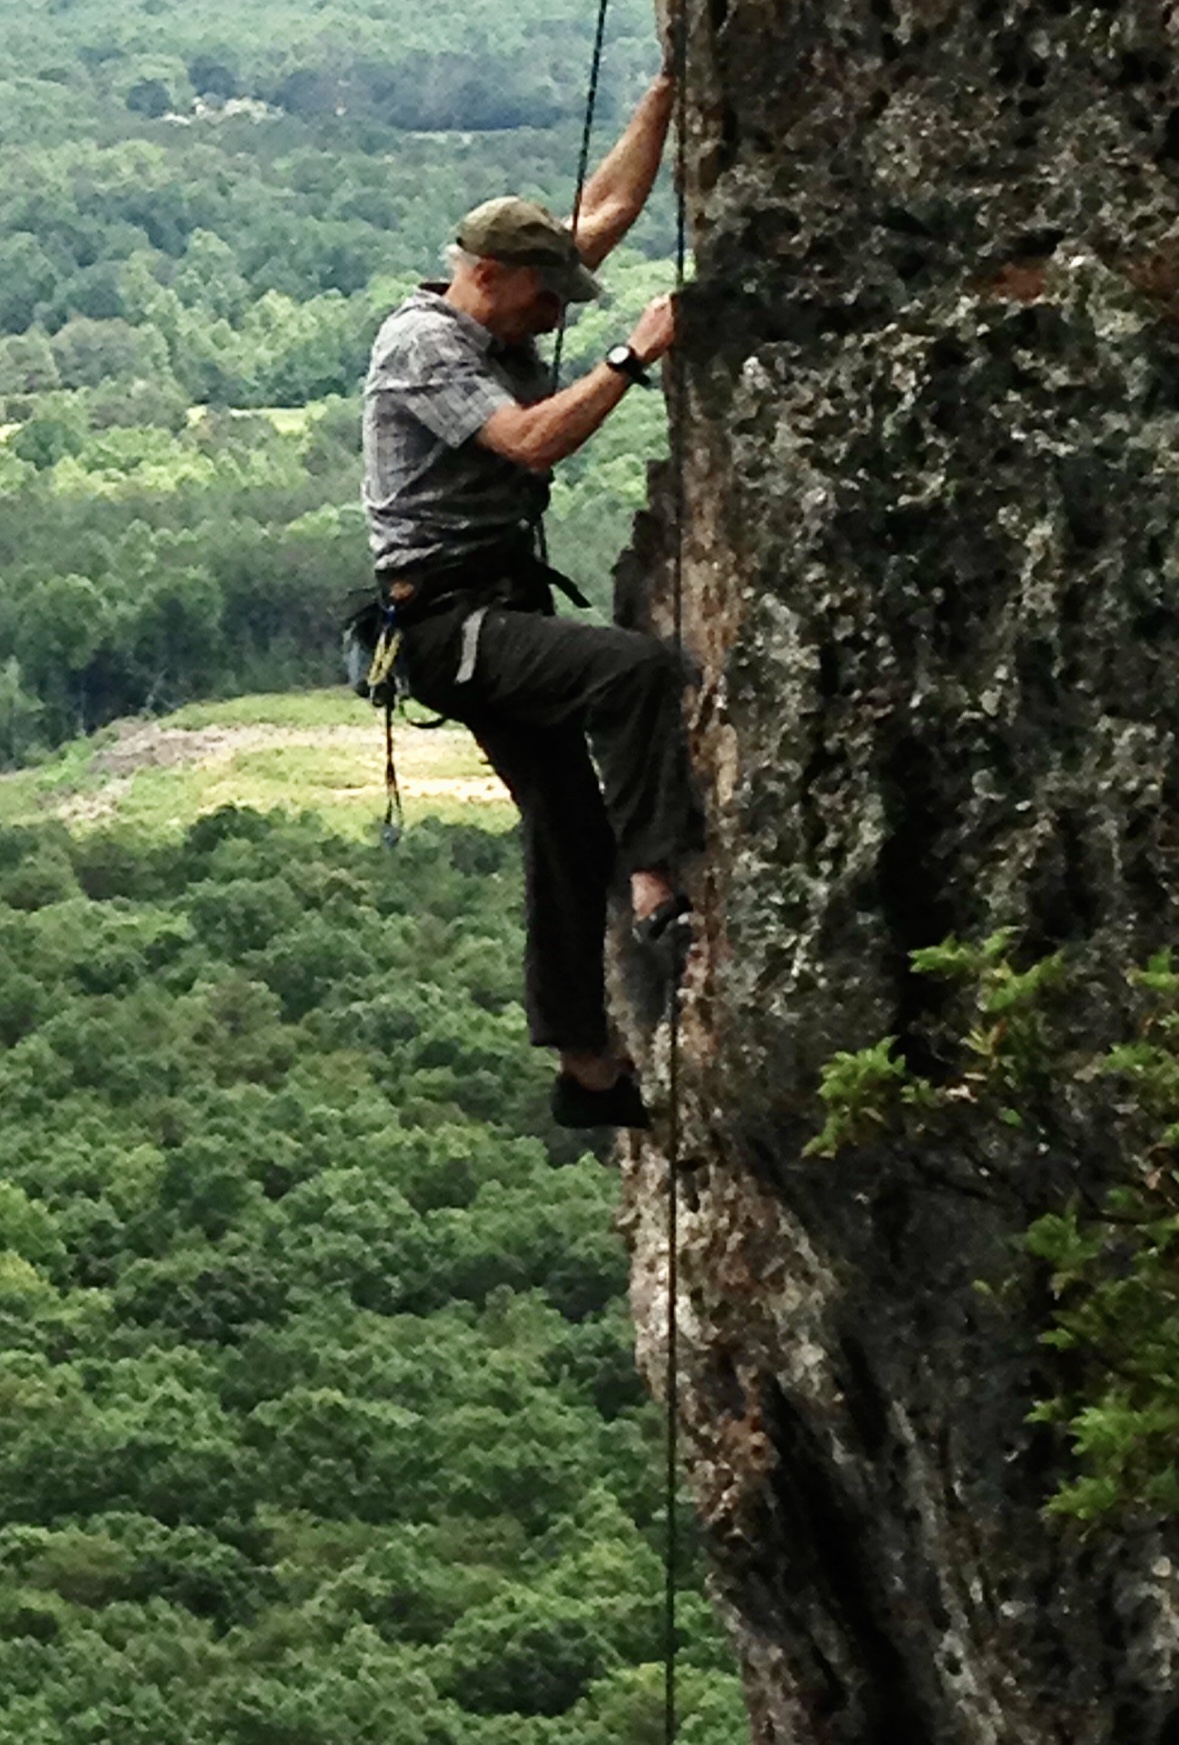 Local lawyer Jan Strifling has been rock climbing in such locales as Crowders Mountain, North Carolina for 36 years and has taught rock climbing in the physical education department at the University of South Carolina. He explains that climbers commonly use eight different knots during a climb. 